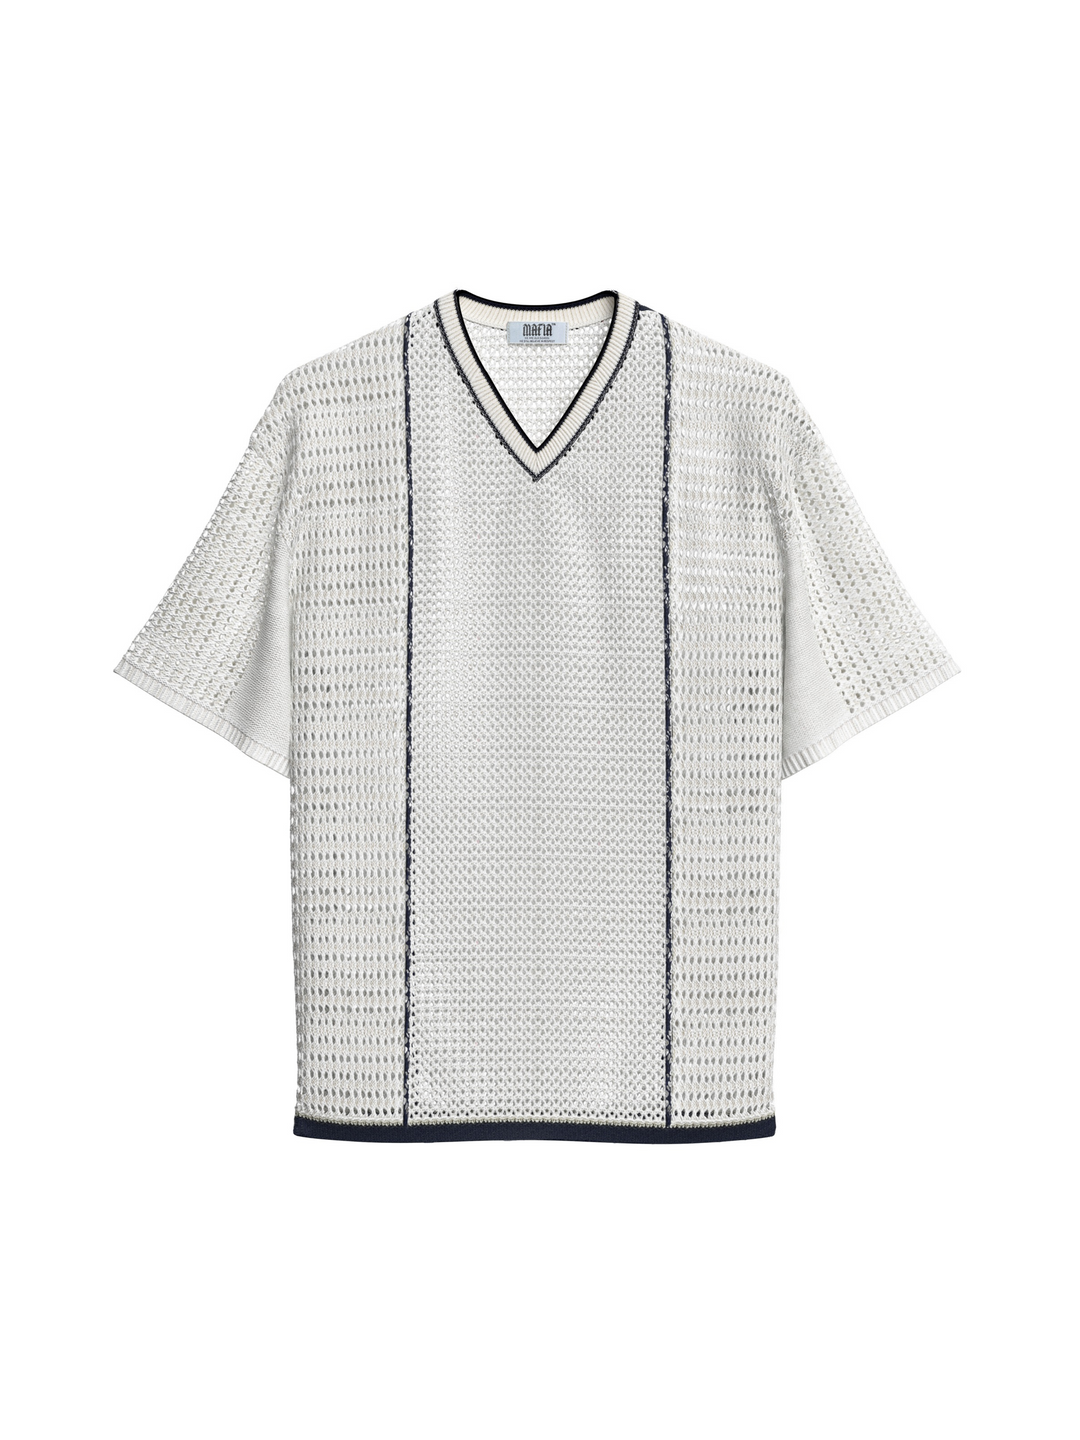 Oversize Details Knit Tee - White